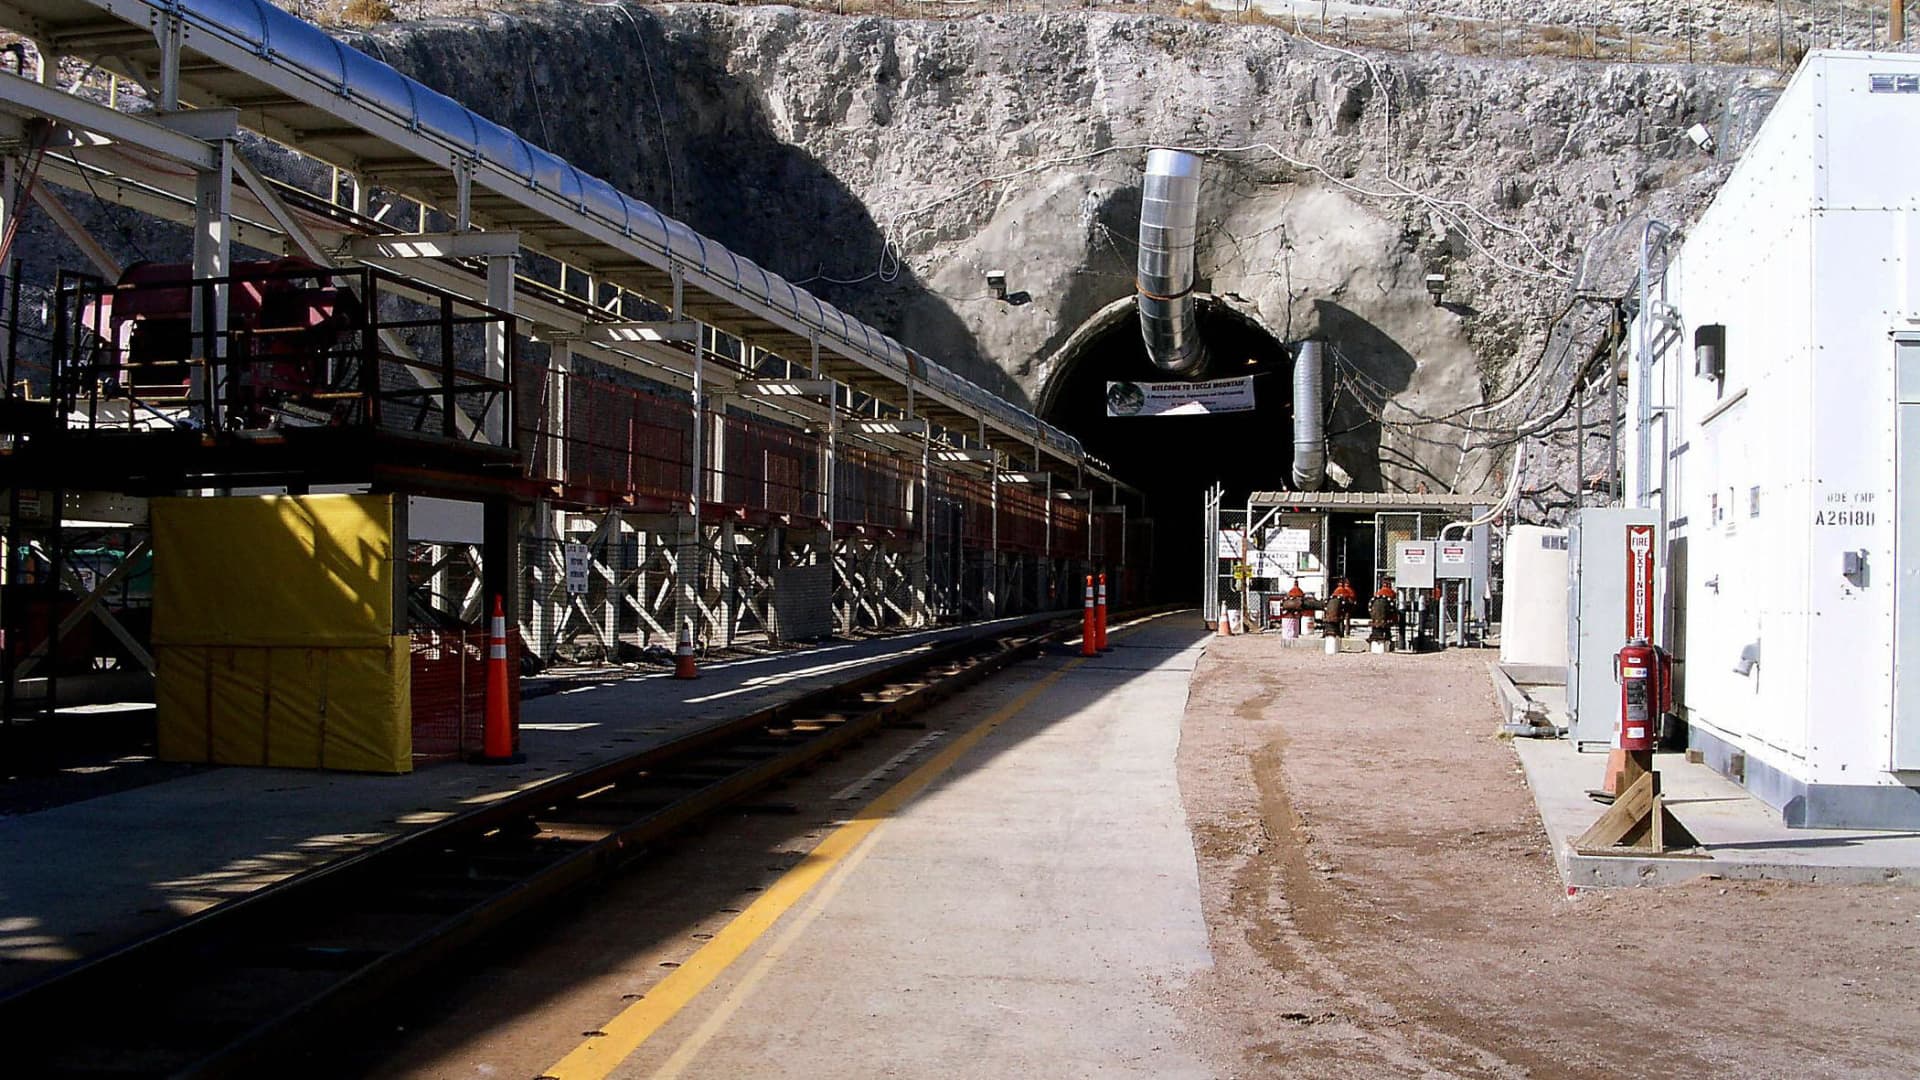 This undated image obtained 22 February, 2004 shows the entrance to the Yucca Mountain nuclear waste repository located in Nye County, Nevada, about 100 miles northwest of Las Vegas.